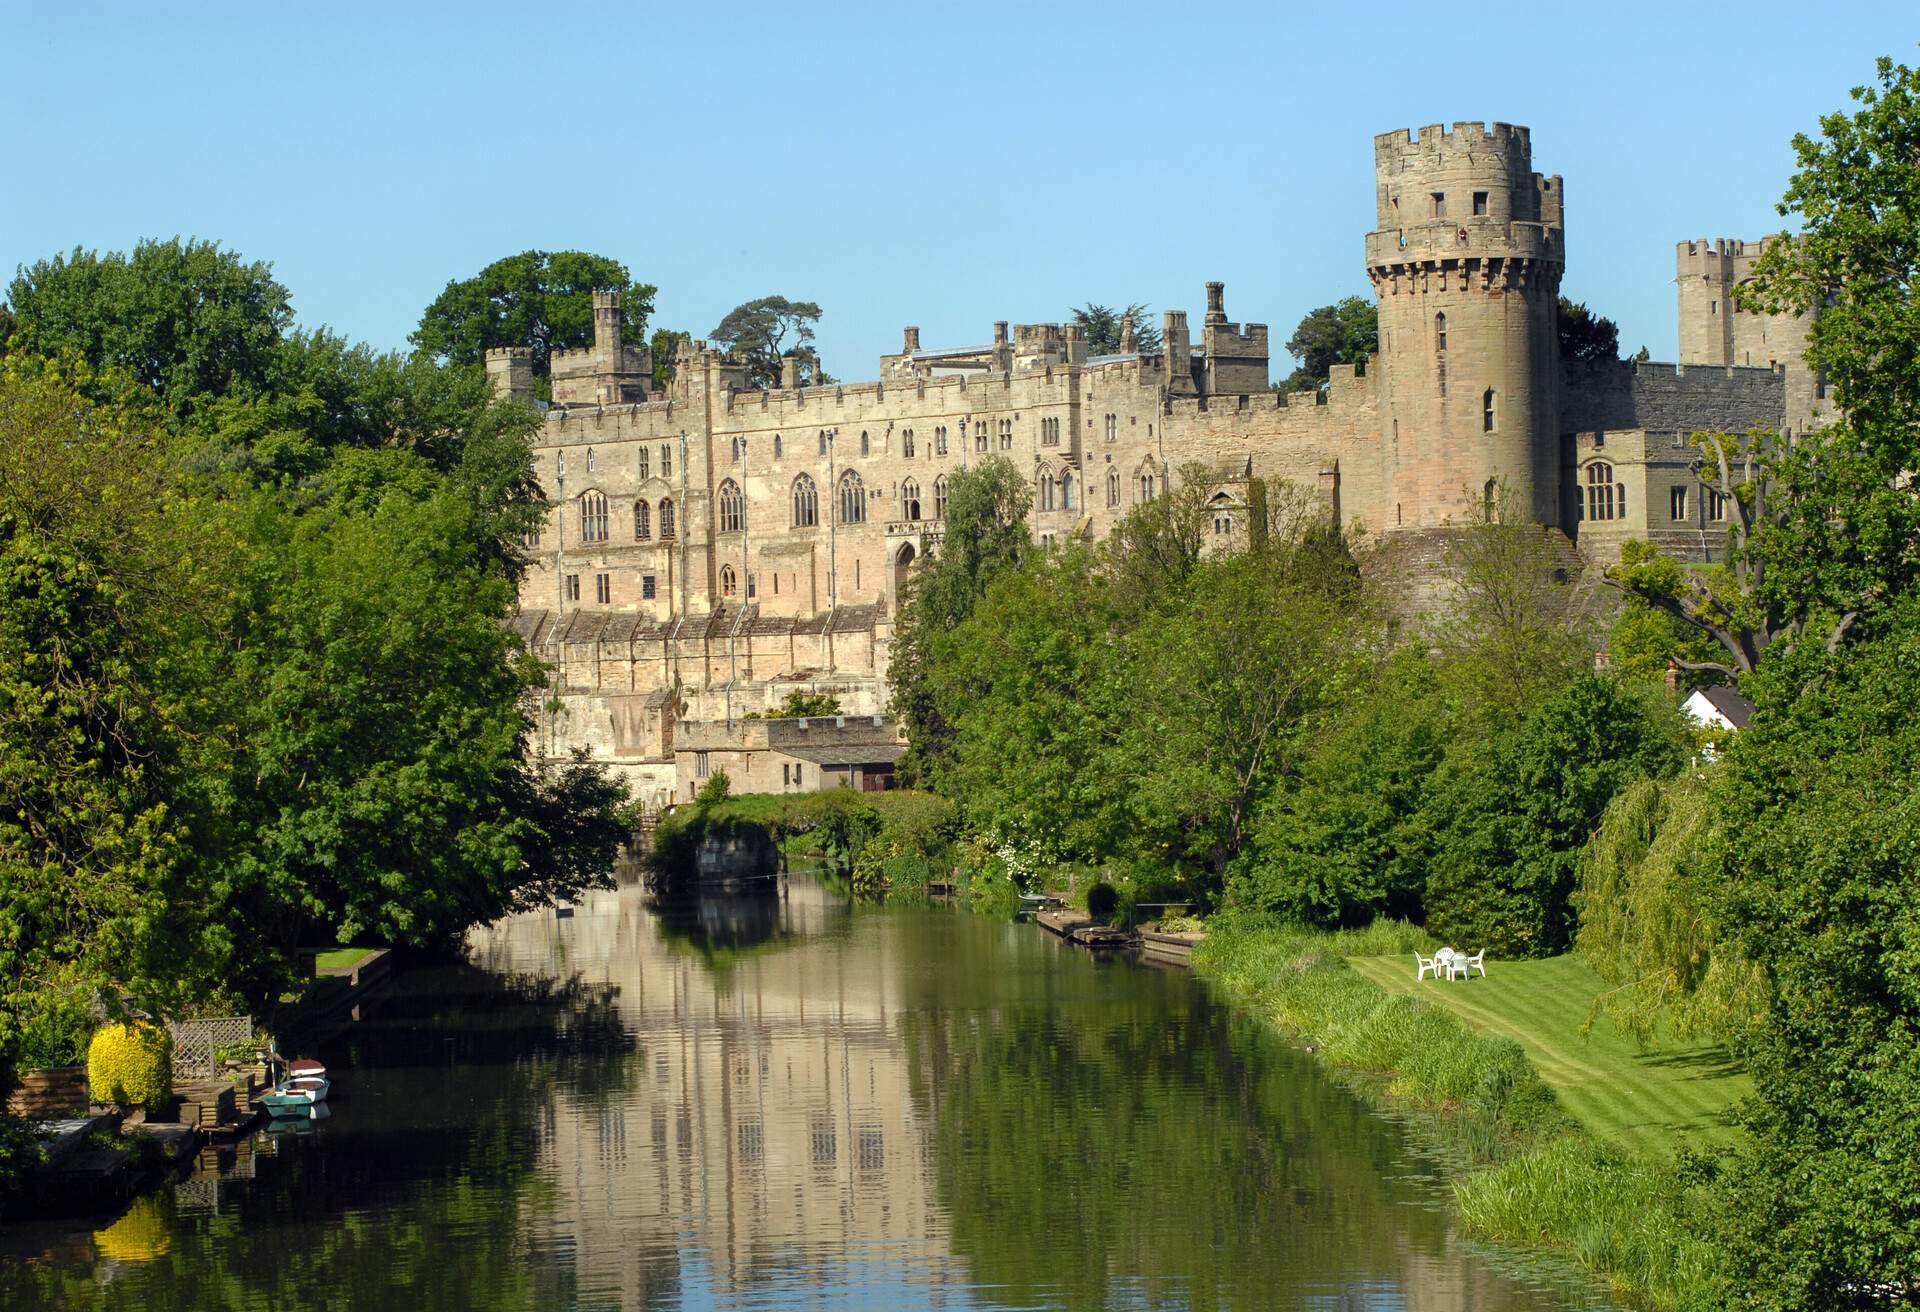 An old medieval castle with a visible round tower along the lush green river.